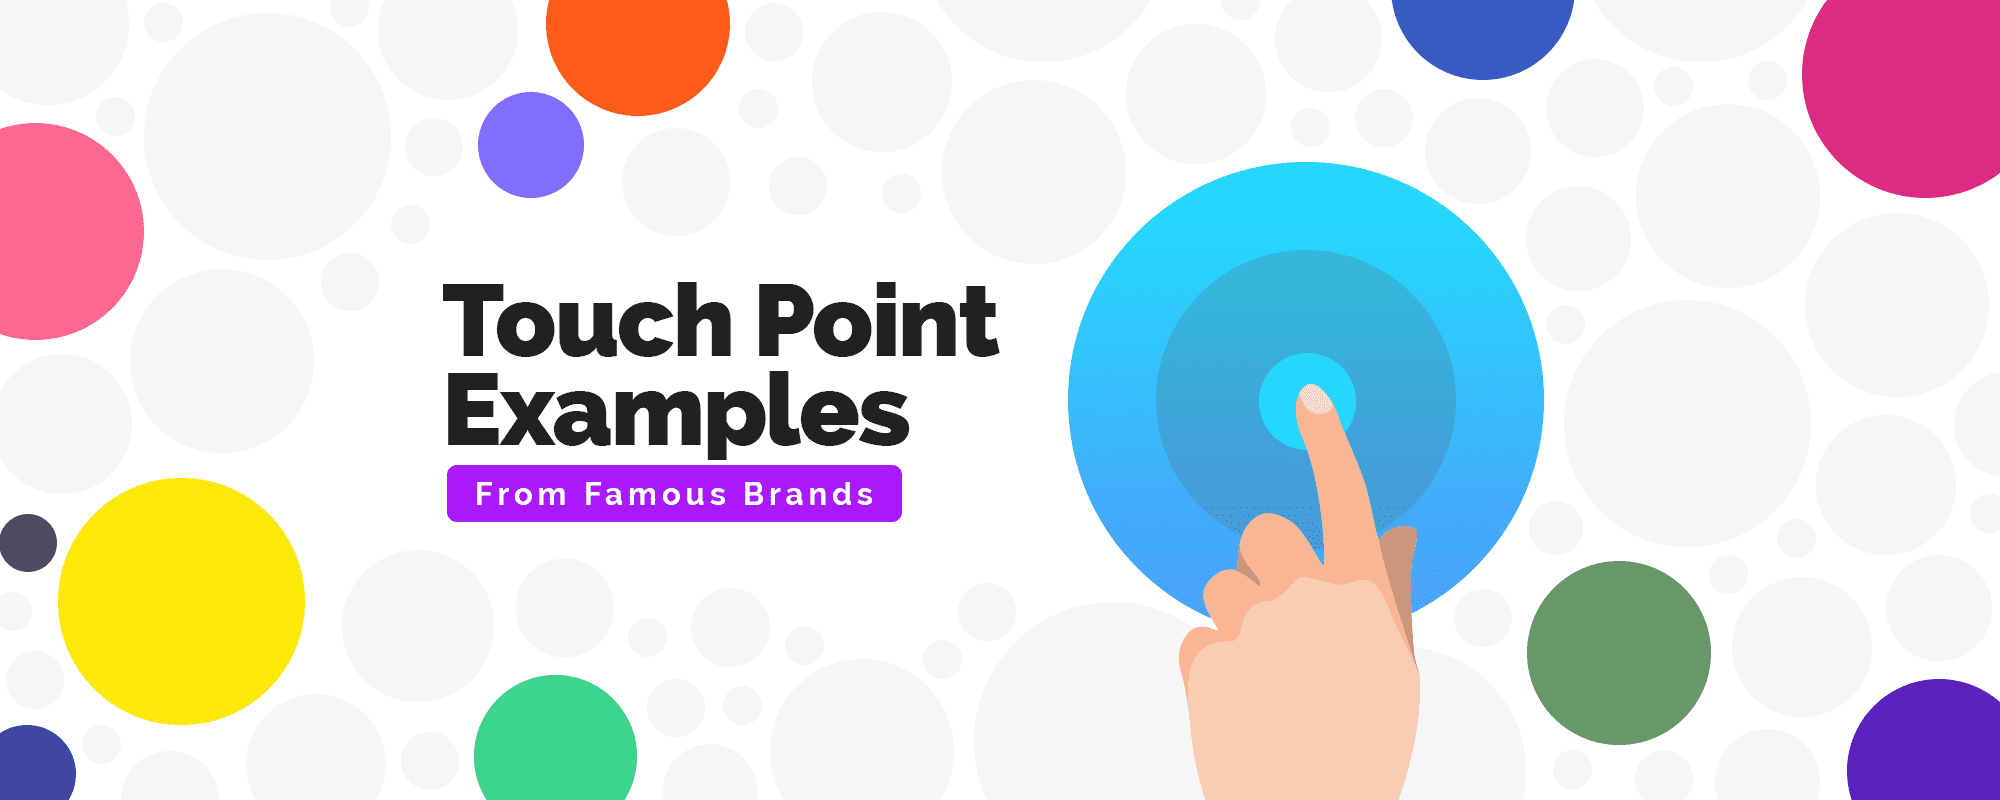 20 Customer Touch Point Examples To Improve Your Customer Journey